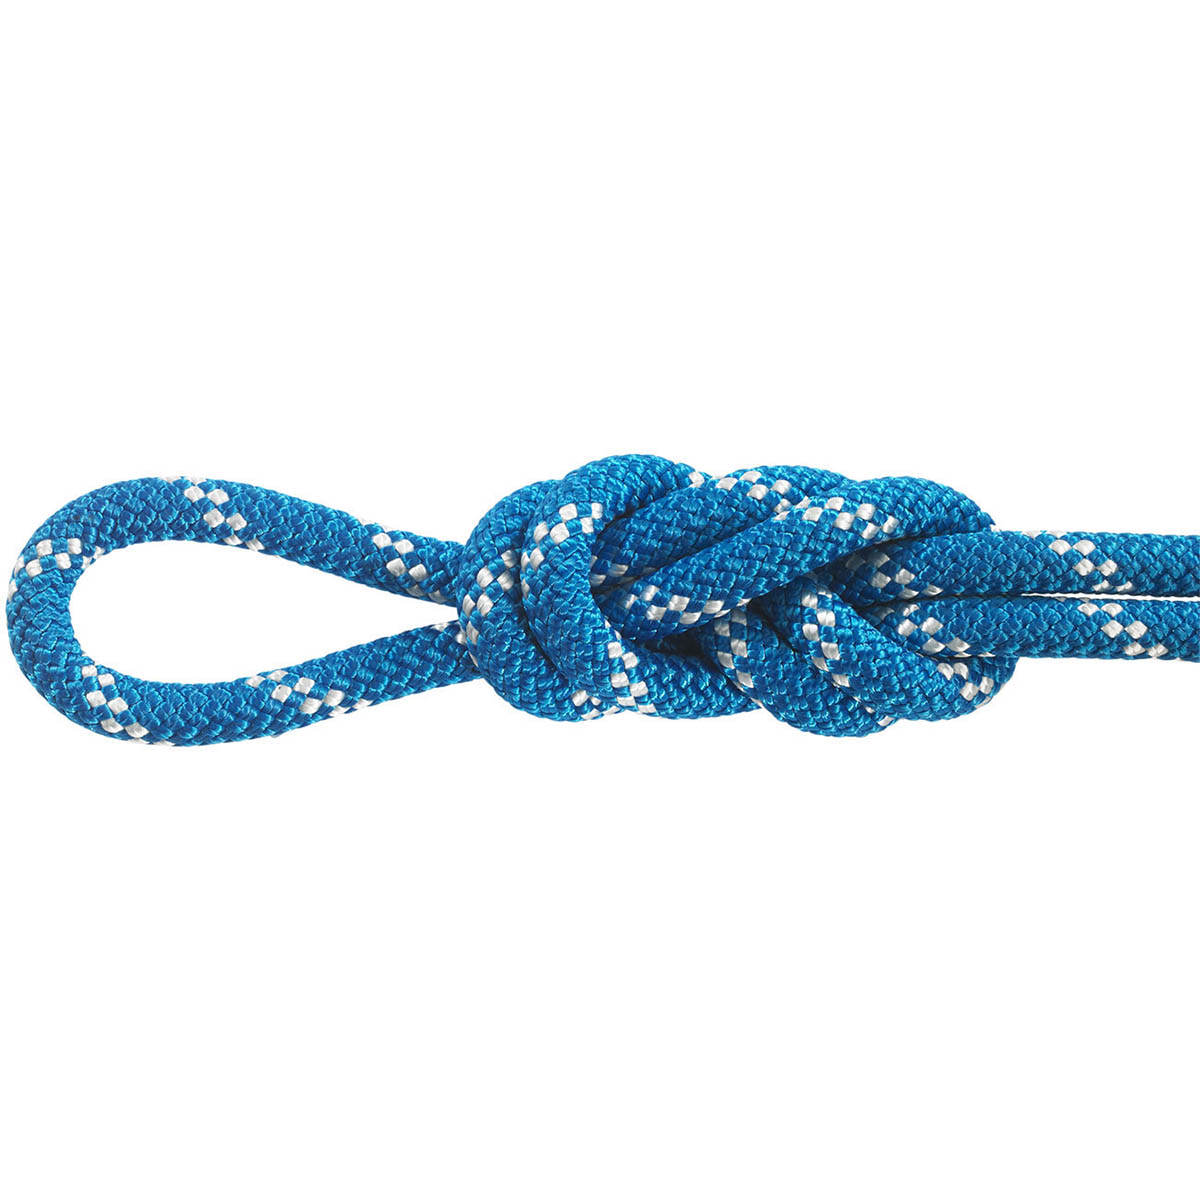 Teufelberger / New England 12.5mm KMIII Static Rope (NFPA G Rated